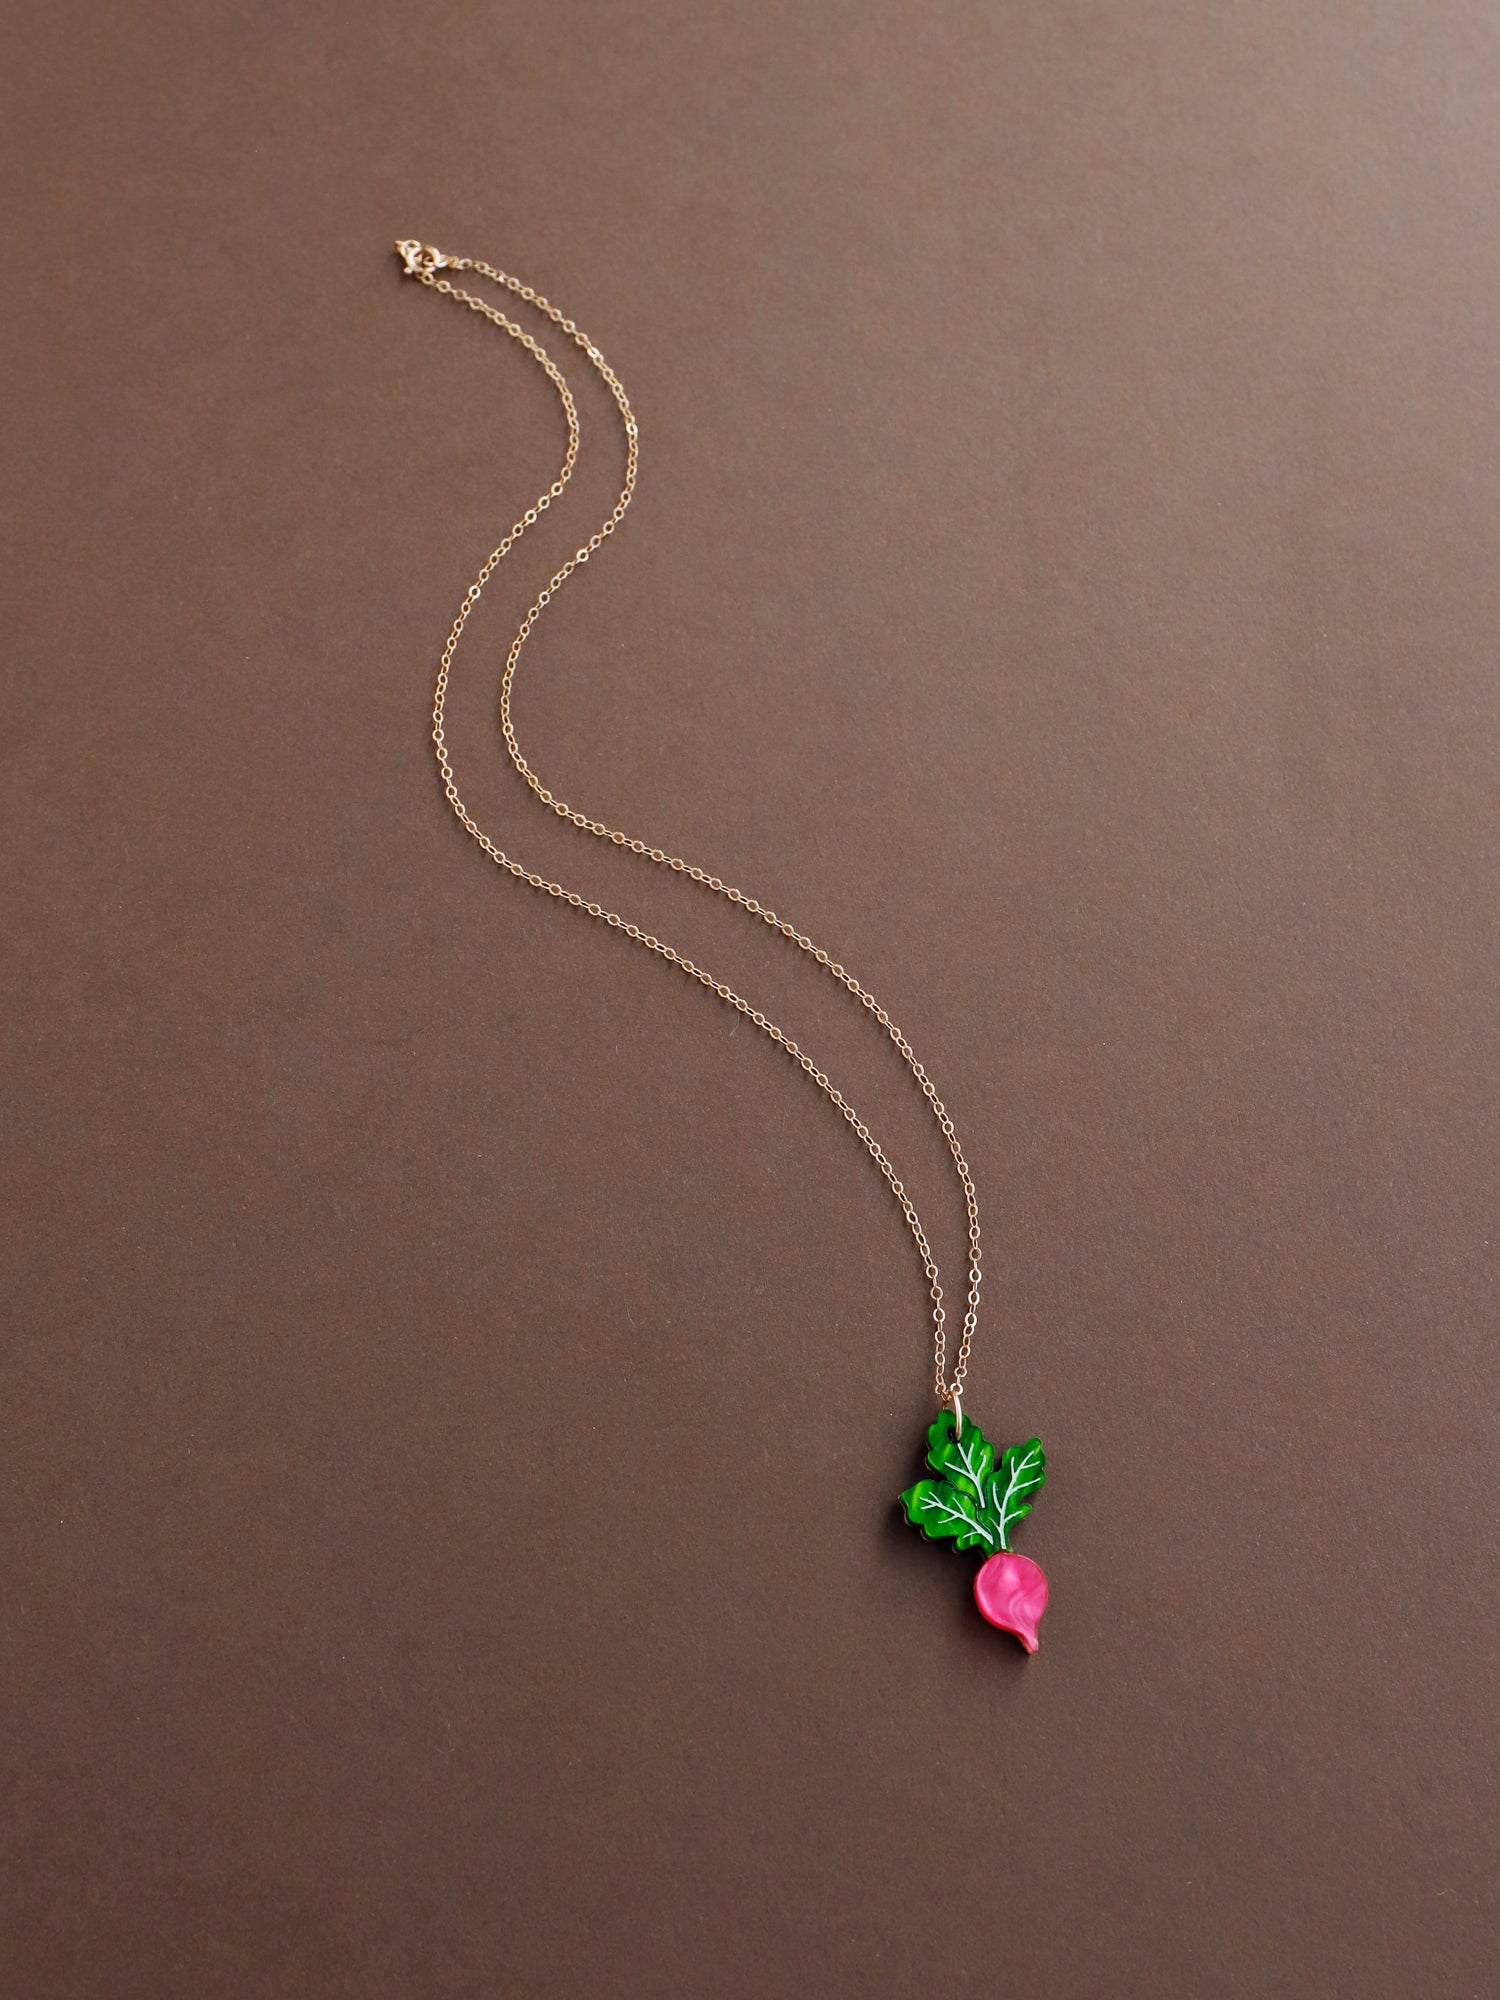 Pink and green mini acrylic radish pendant necklace with optional gold-filled chain. Handmade in London by Wolf & Moon.